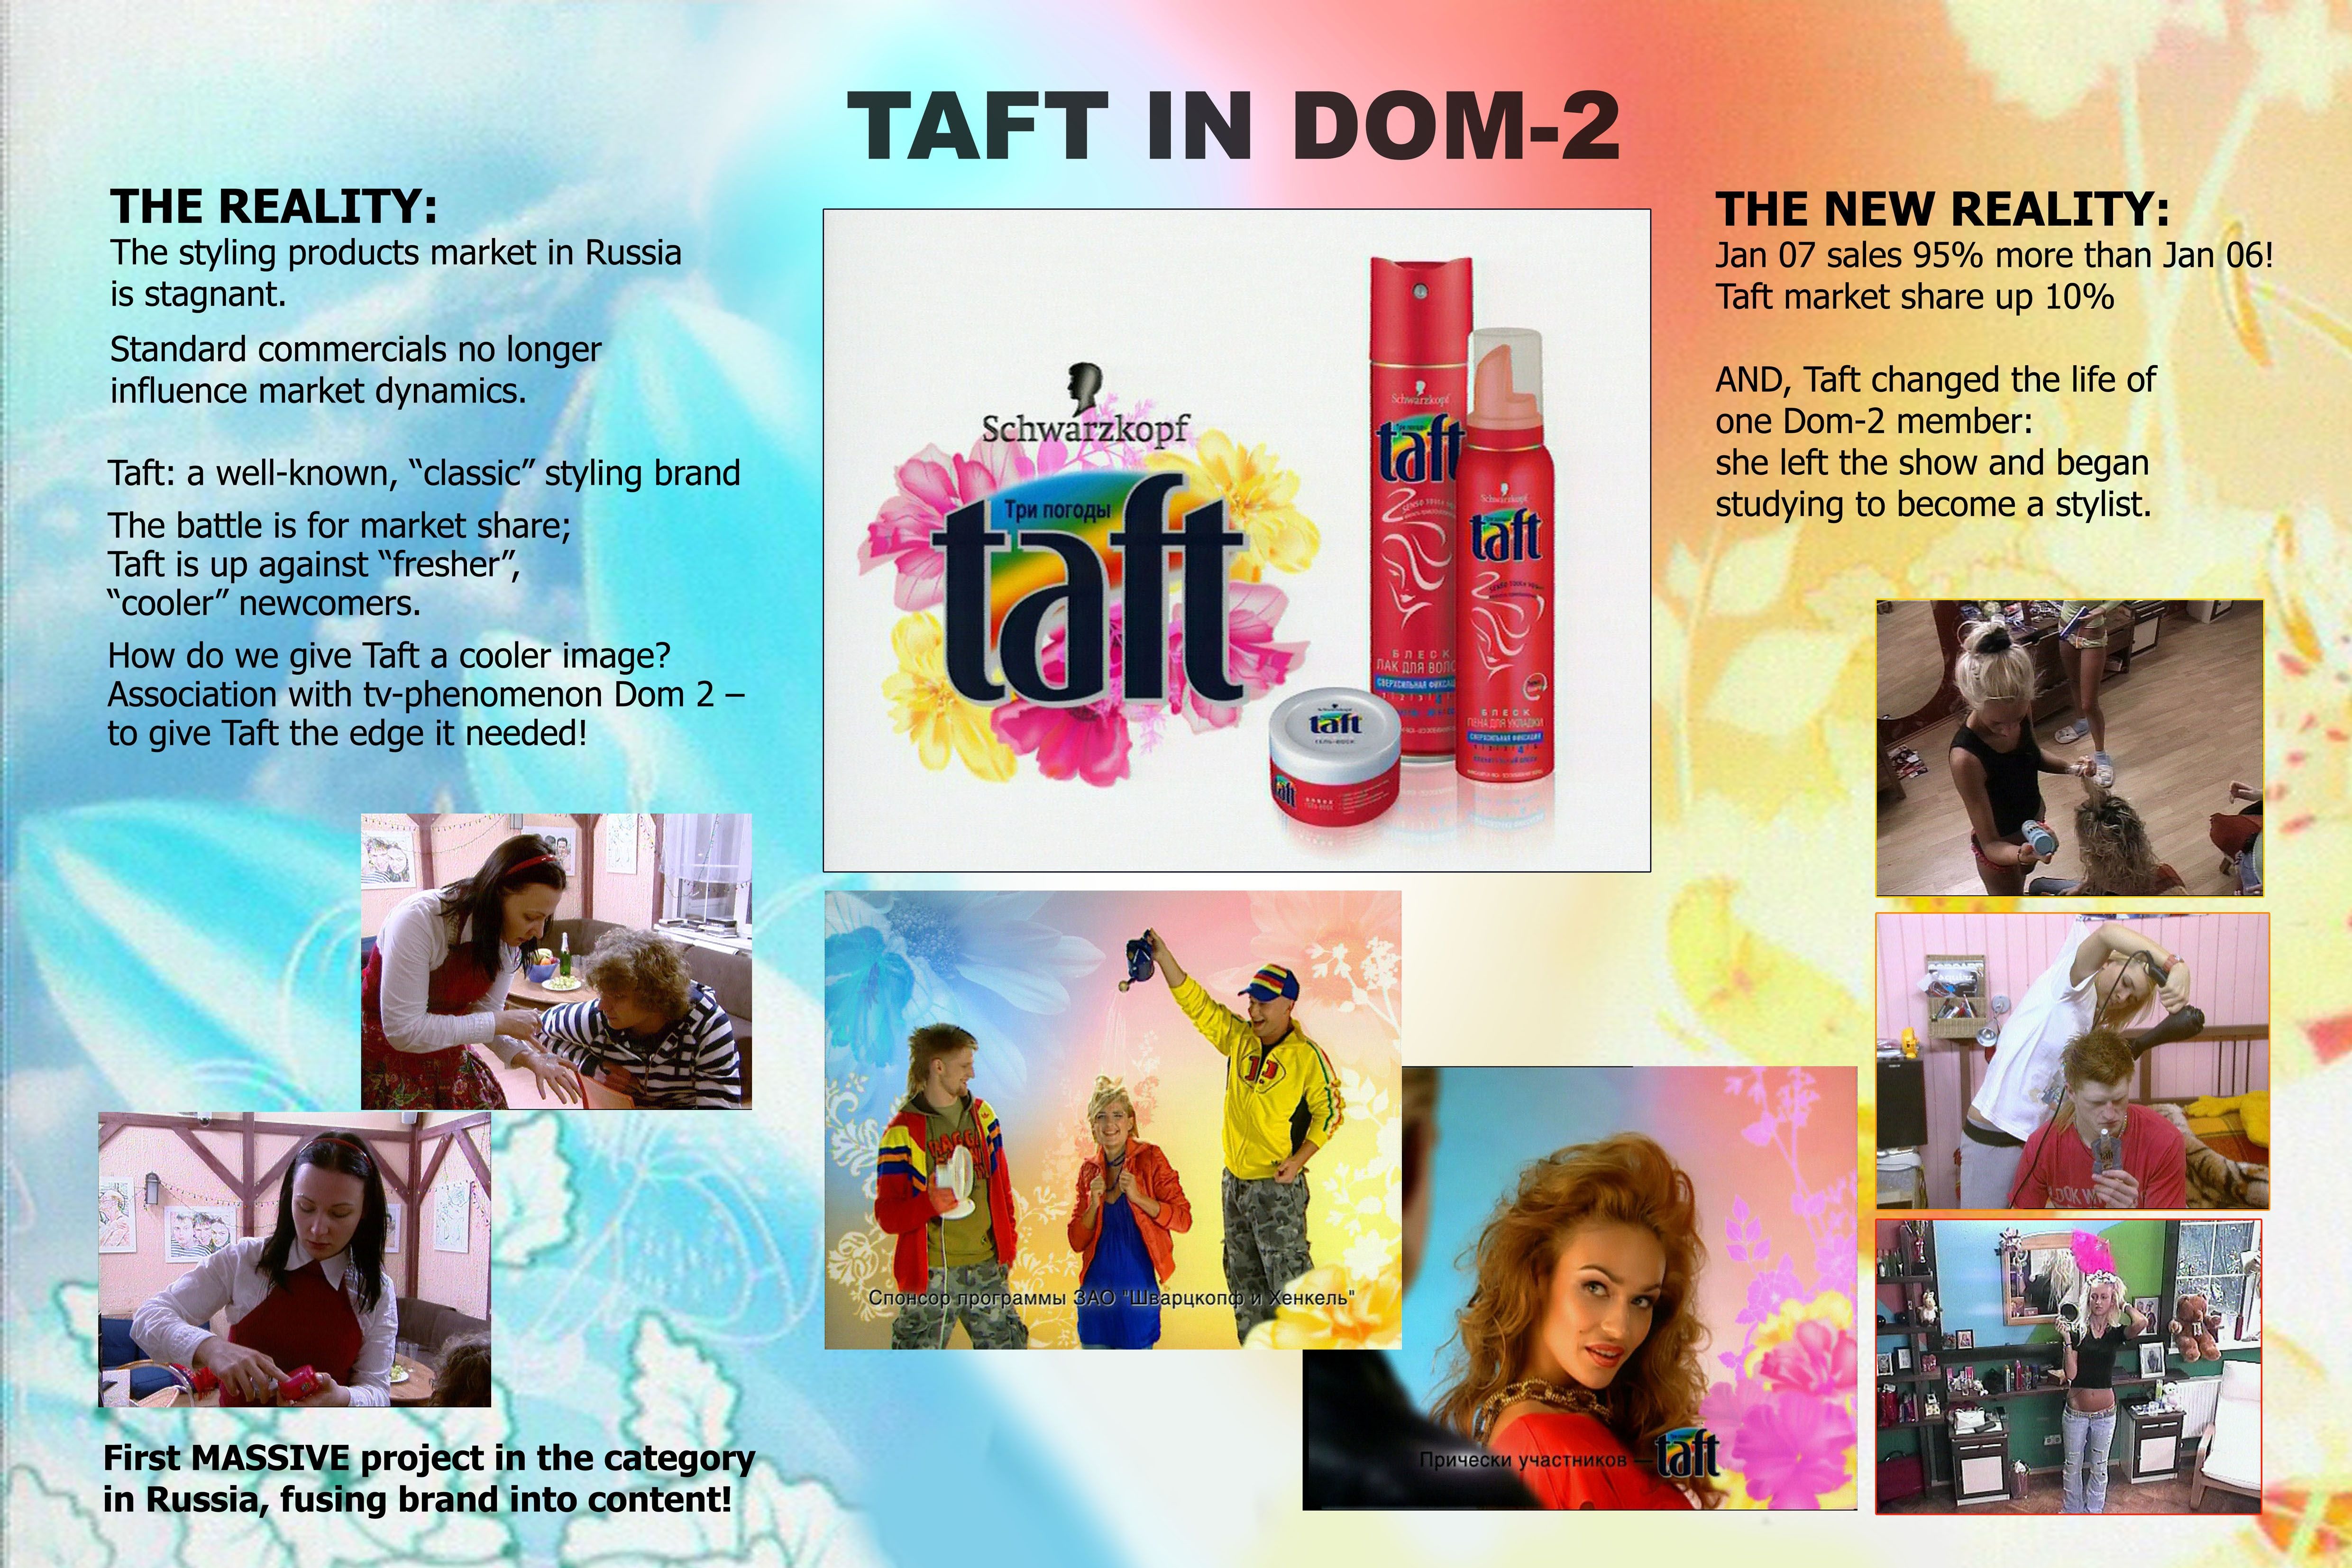 TAFT HAIR STYLING PRODUCTS